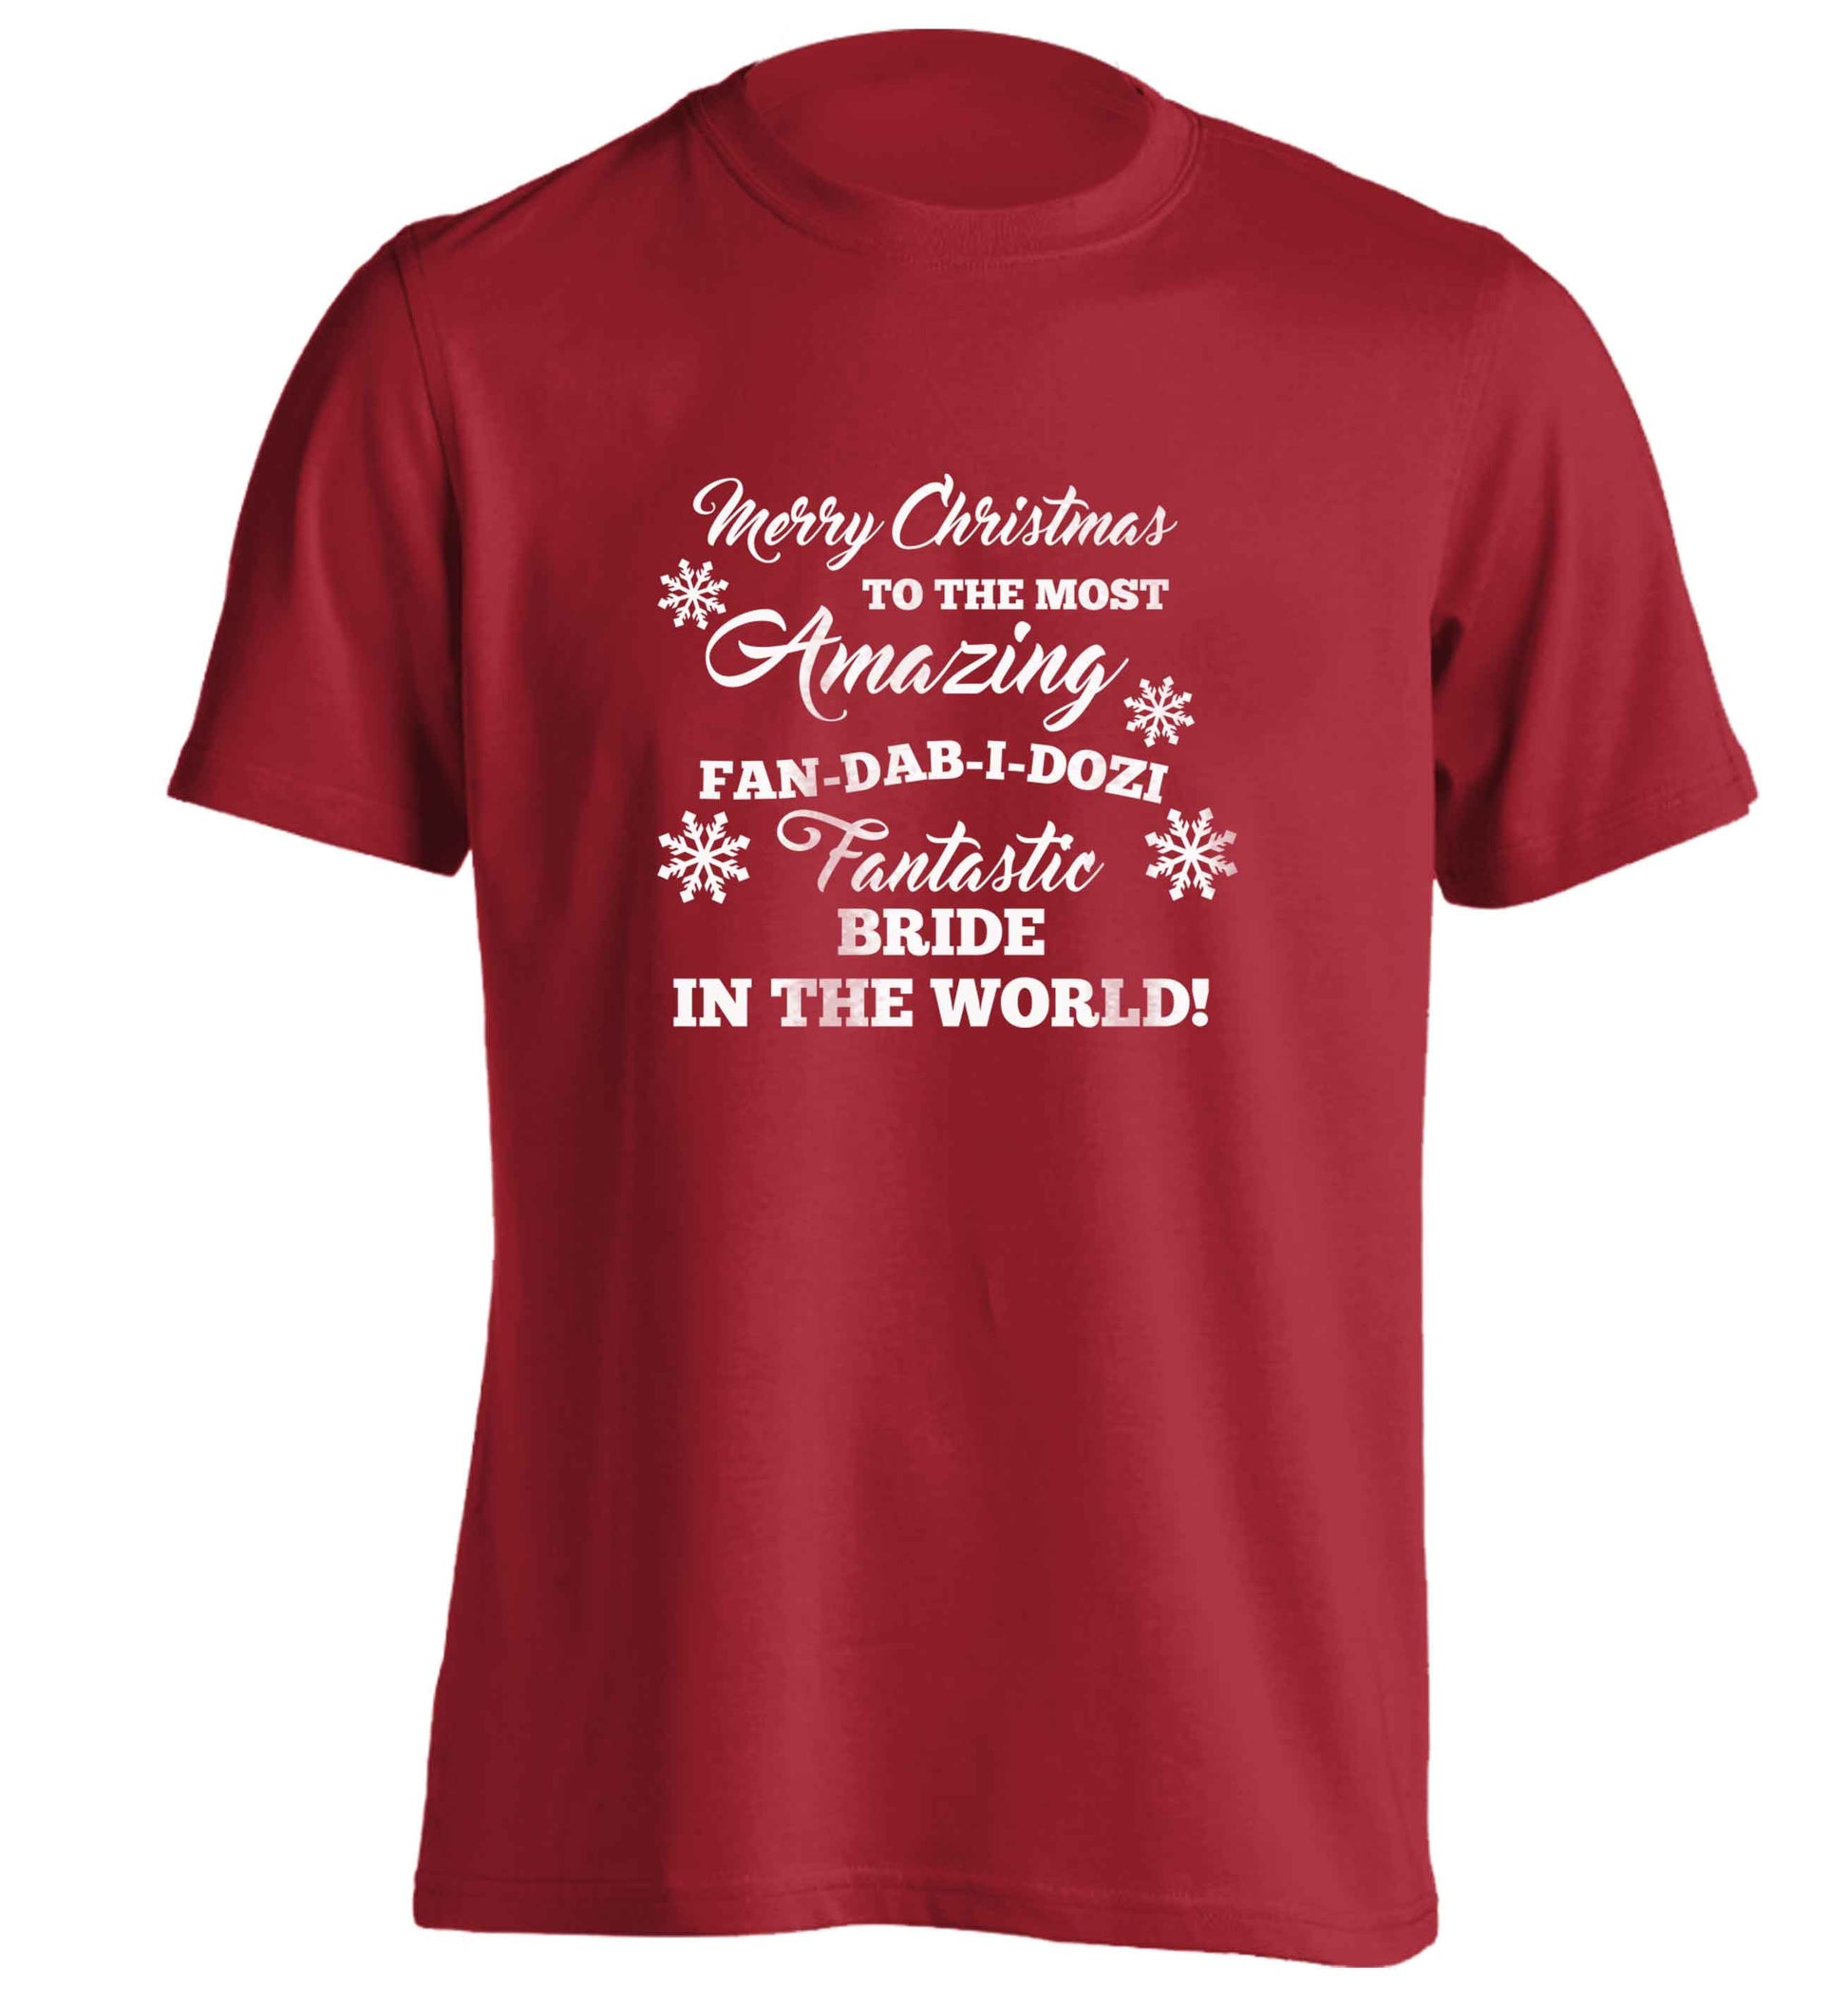 Merry Christmas to the most amazing bride in the world! adults unisex red Tshirt 2XL